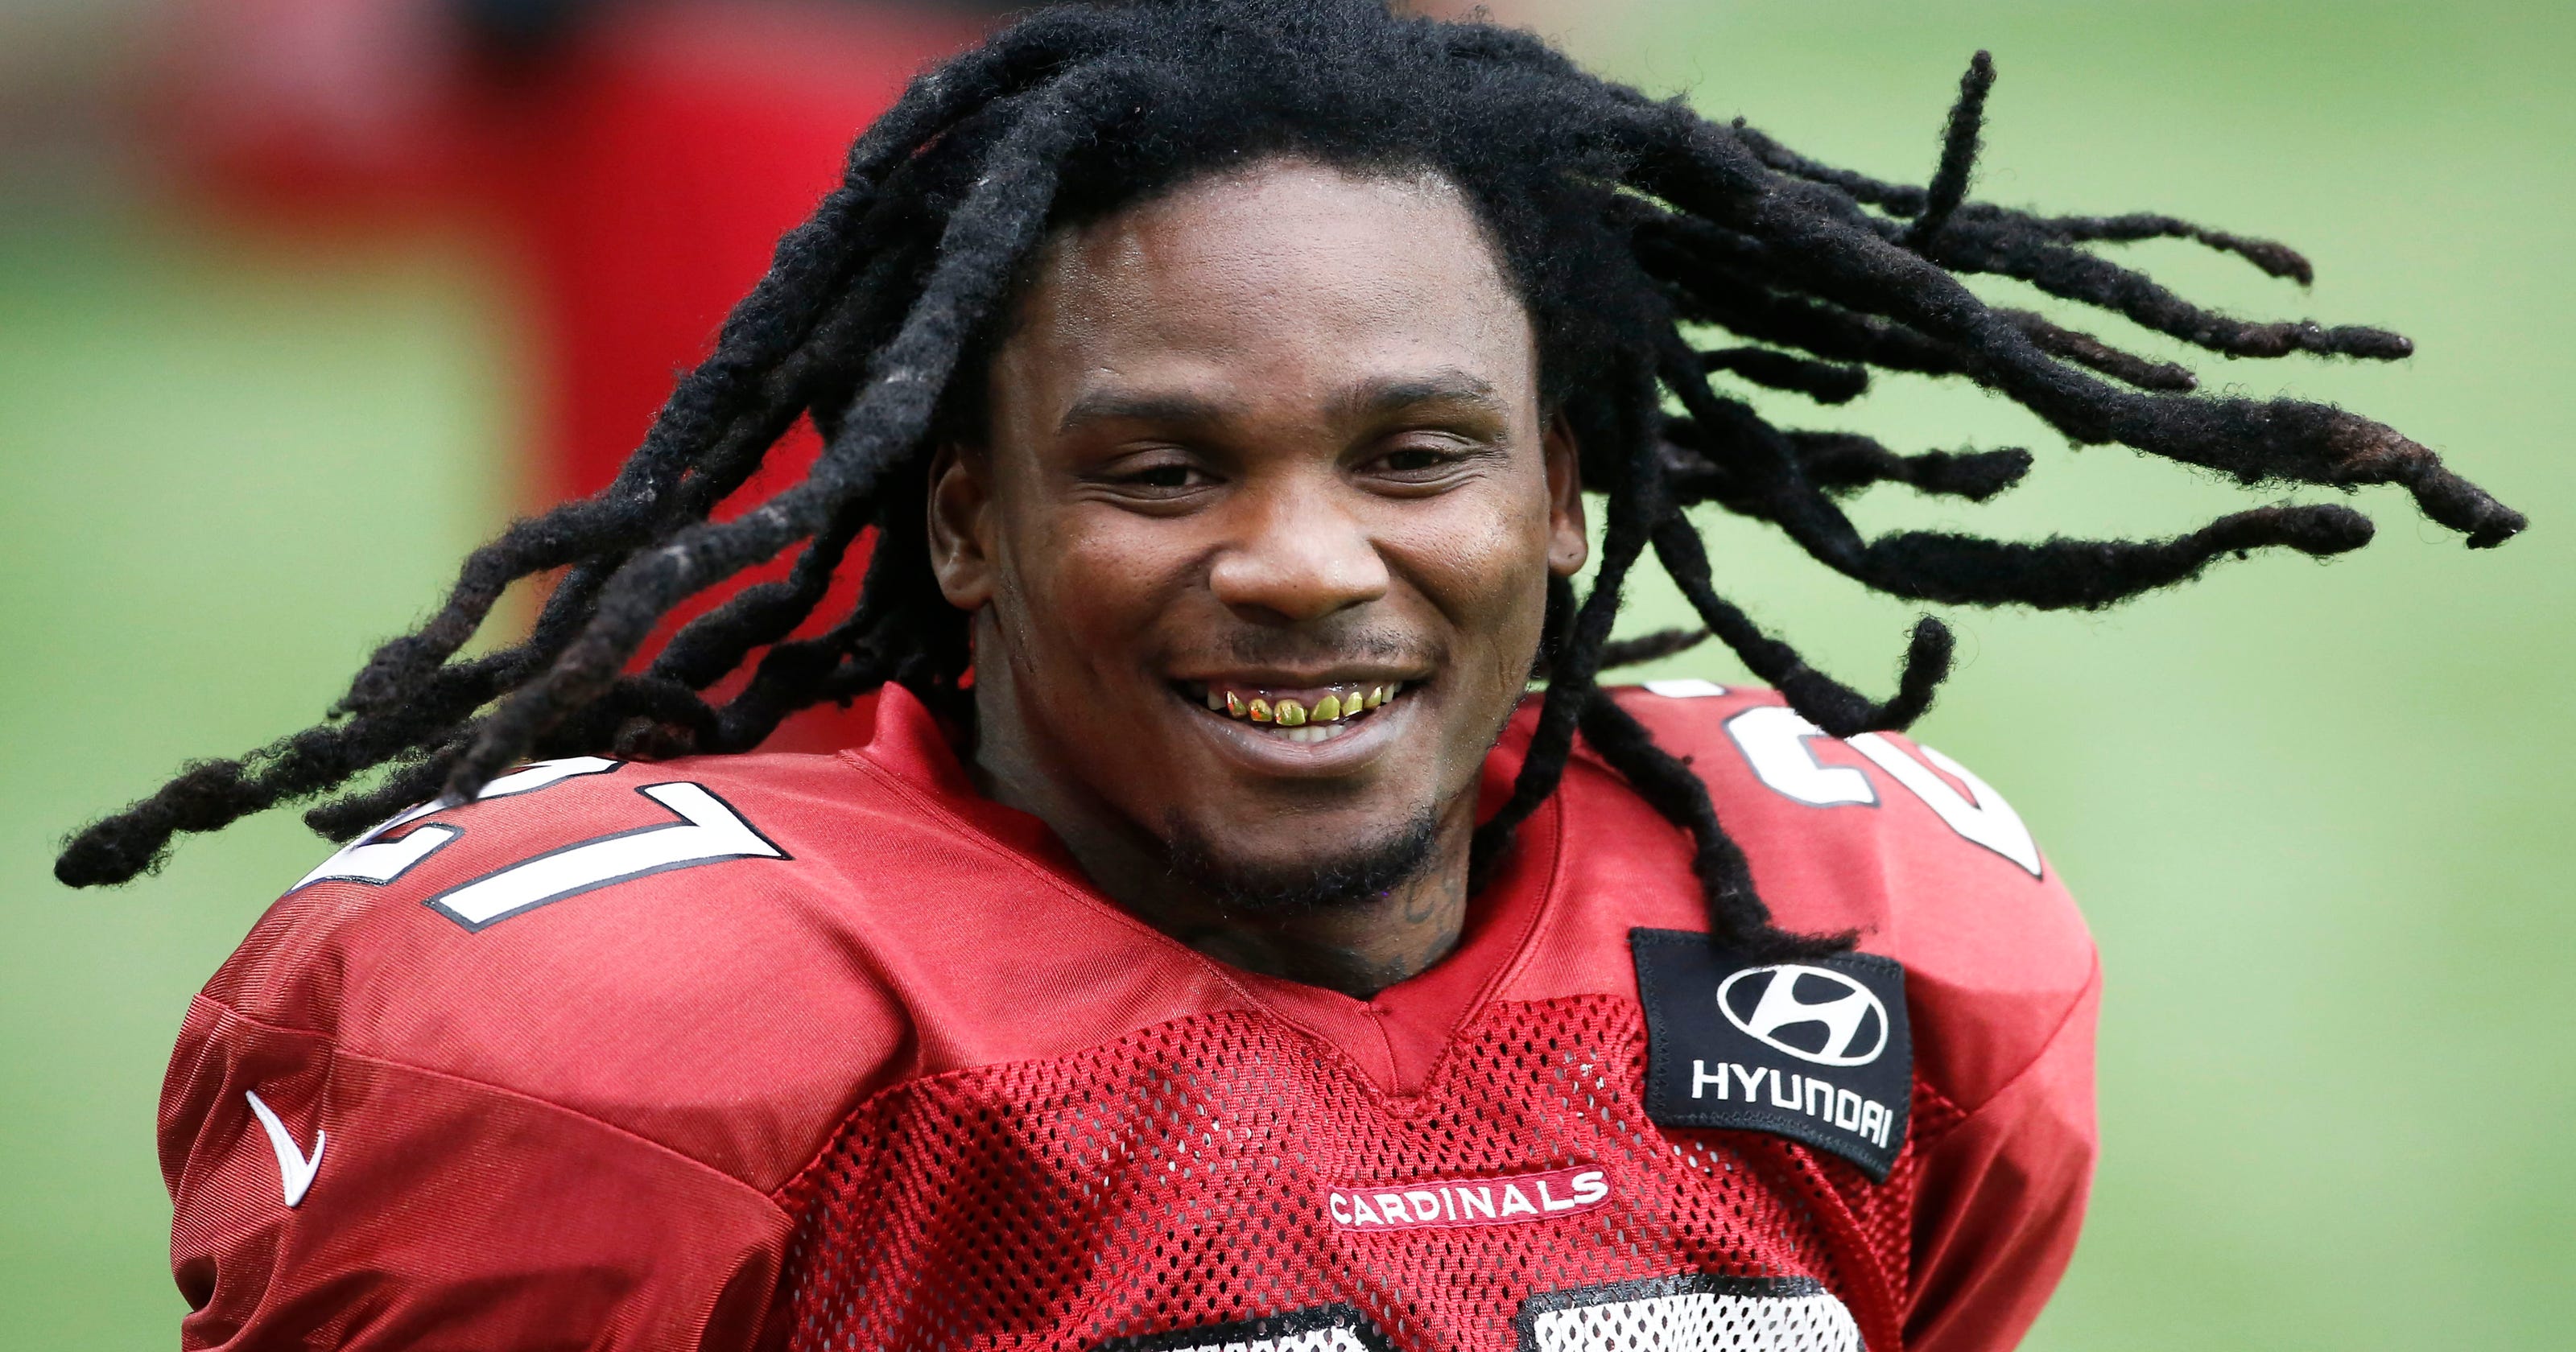 Chris Johnson reacts on Twitter to being released.